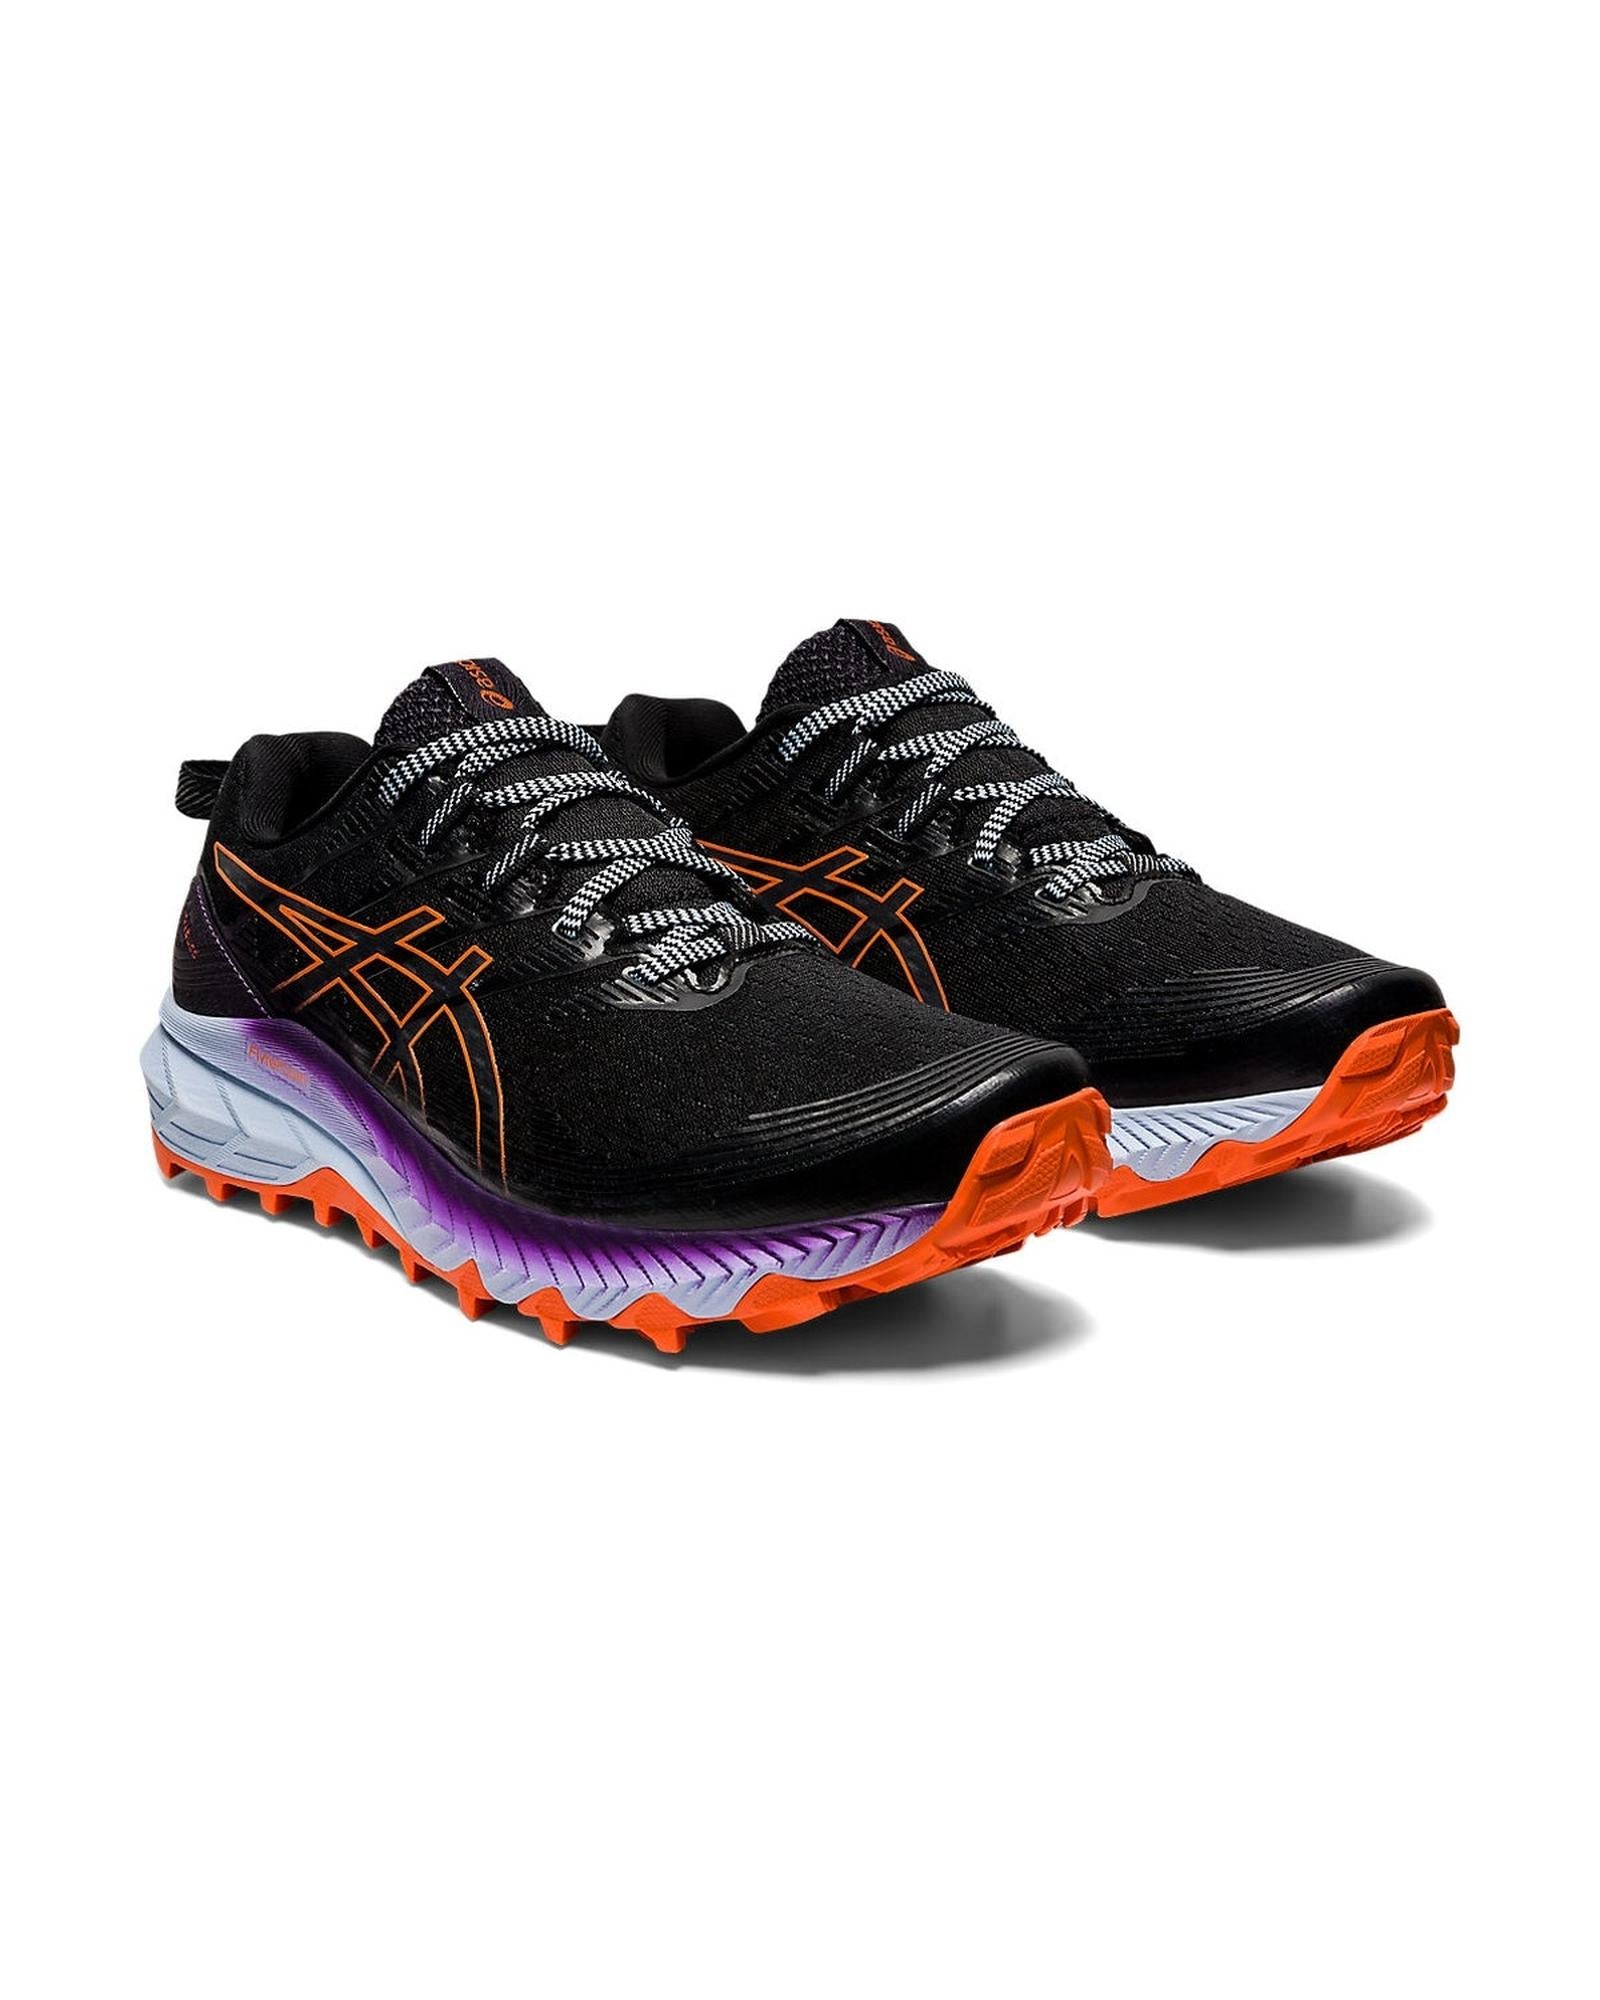 Advanced Trail Running Shoes with Rock Protection Plate and ASICSGRIP Outsole - 7 US